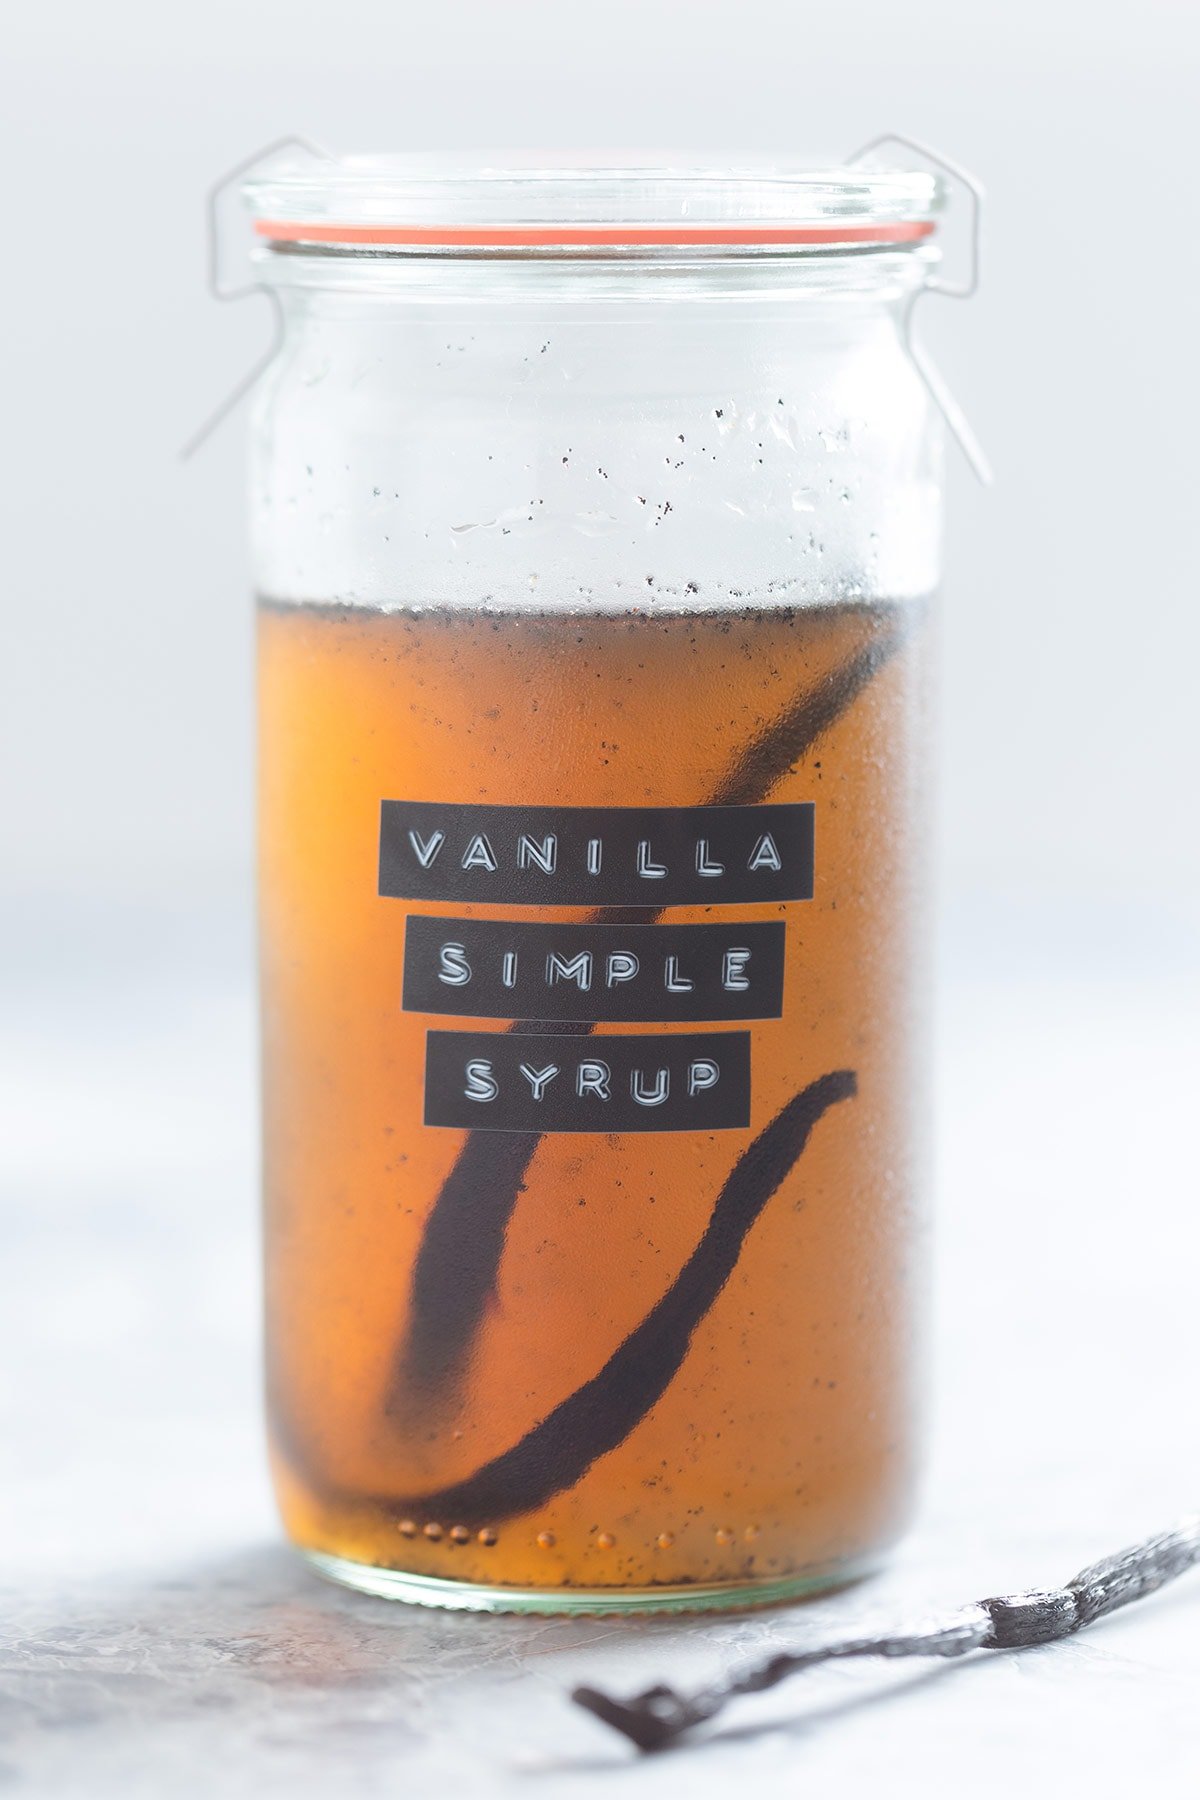 A glass jar of vanilla simple syrup with a whole vanilla bean inside the jar on a grey background, the jar has a label on it that says vanilla simple syrup.